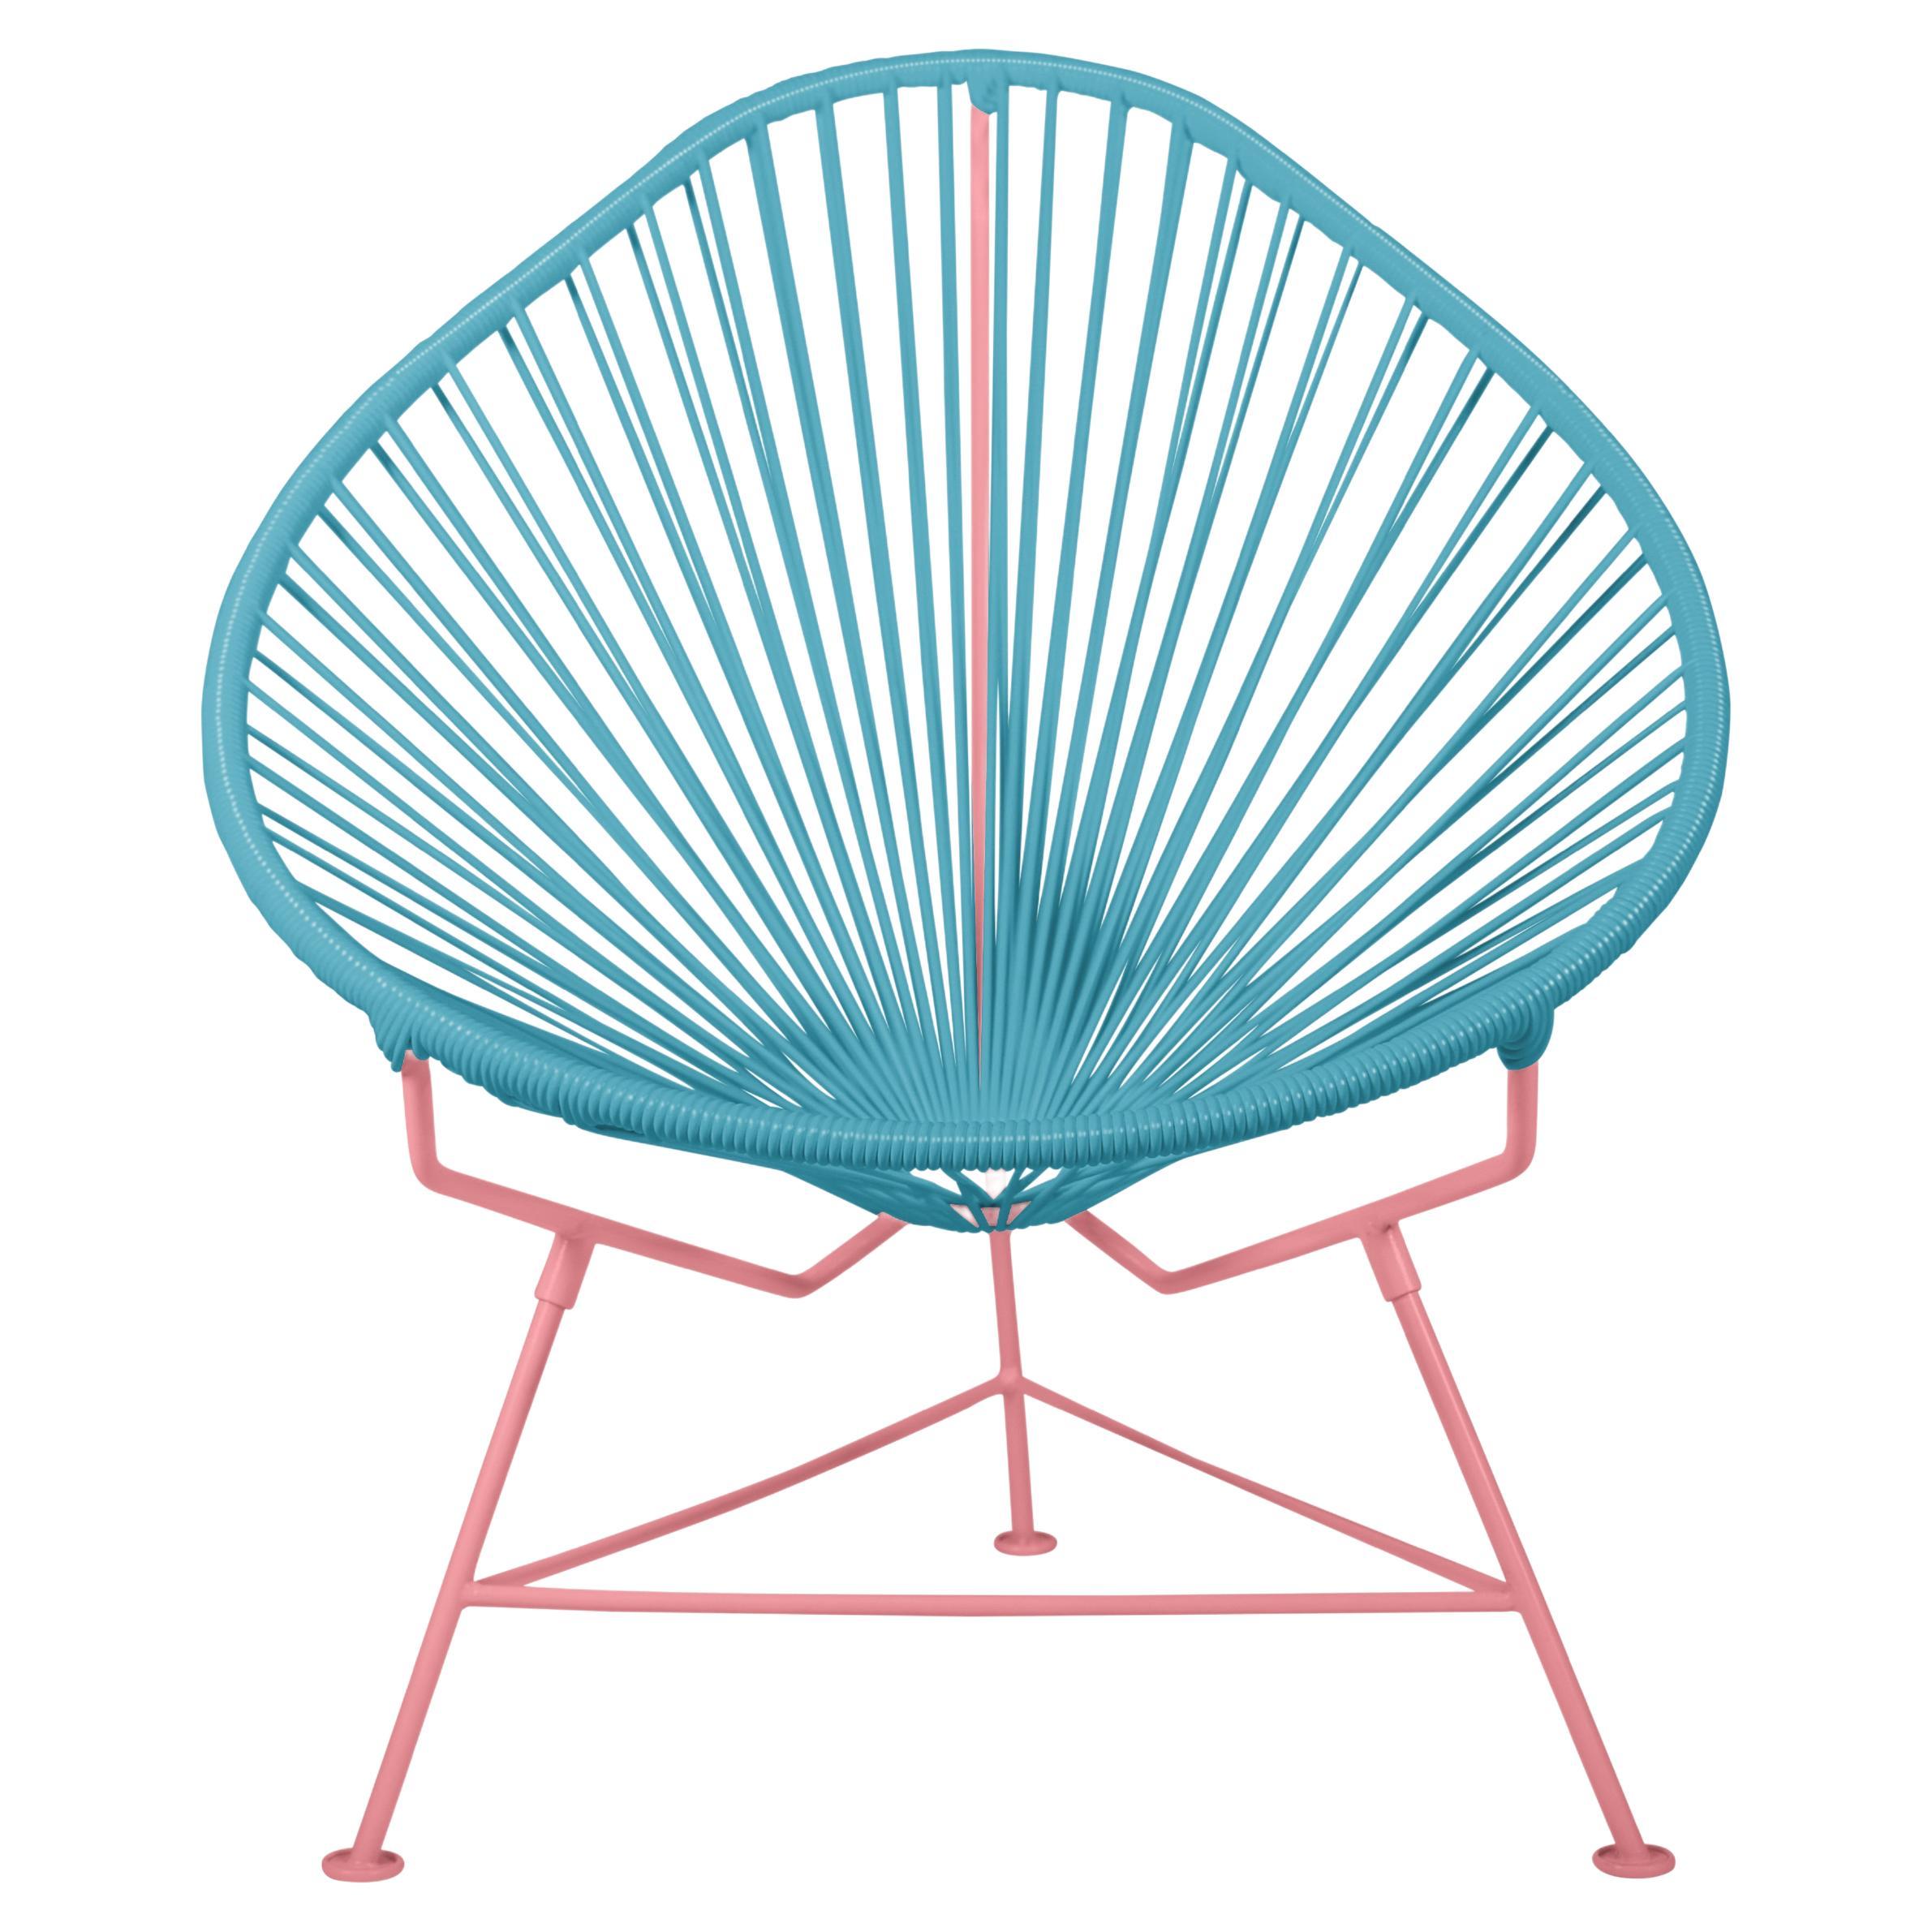 Innit Designs Acapulco Chair Blue Weave on Coral Frame